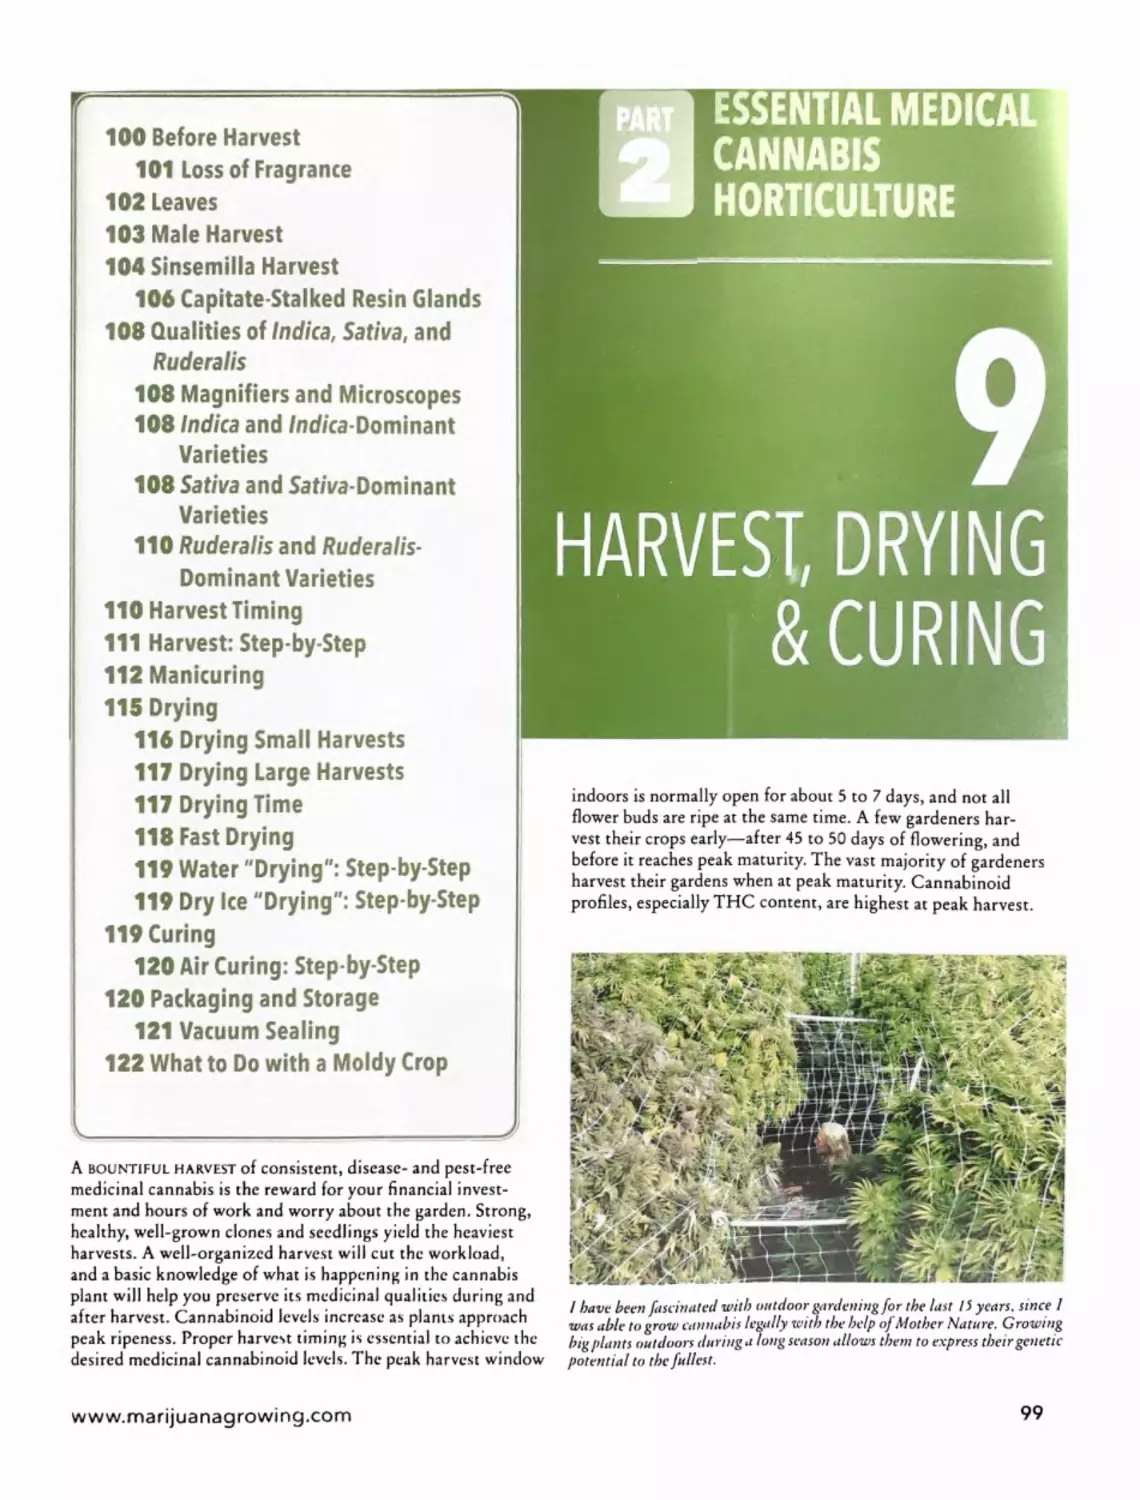 Chapter 9 - Harvest, Drying & Curing